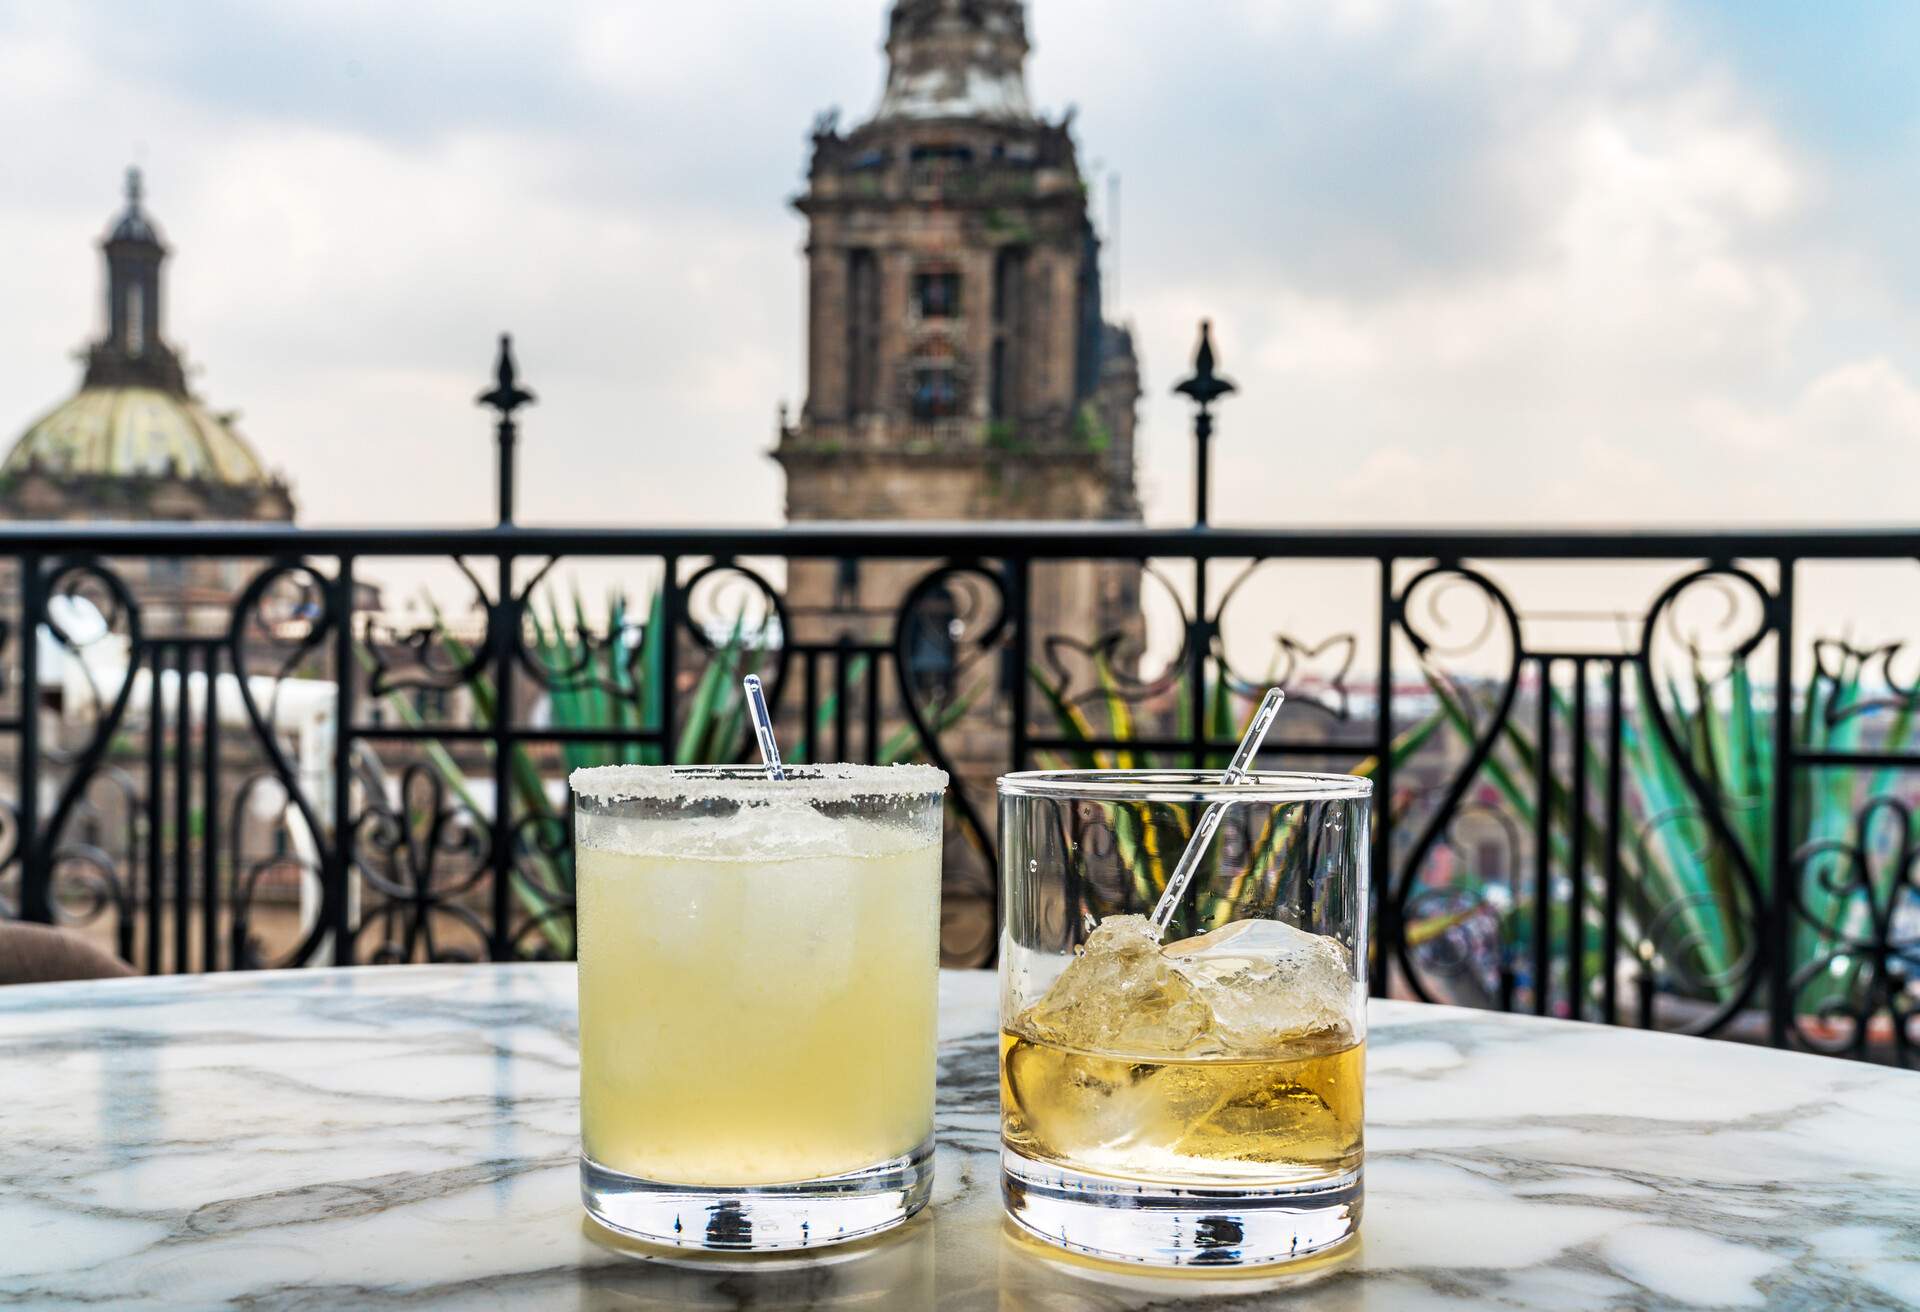 DEST_MEXICO_MEXICO-CITY_THEME_HAPPY-HOUR_MARGARITAS_TEQUILA_GettyImages-1048467530